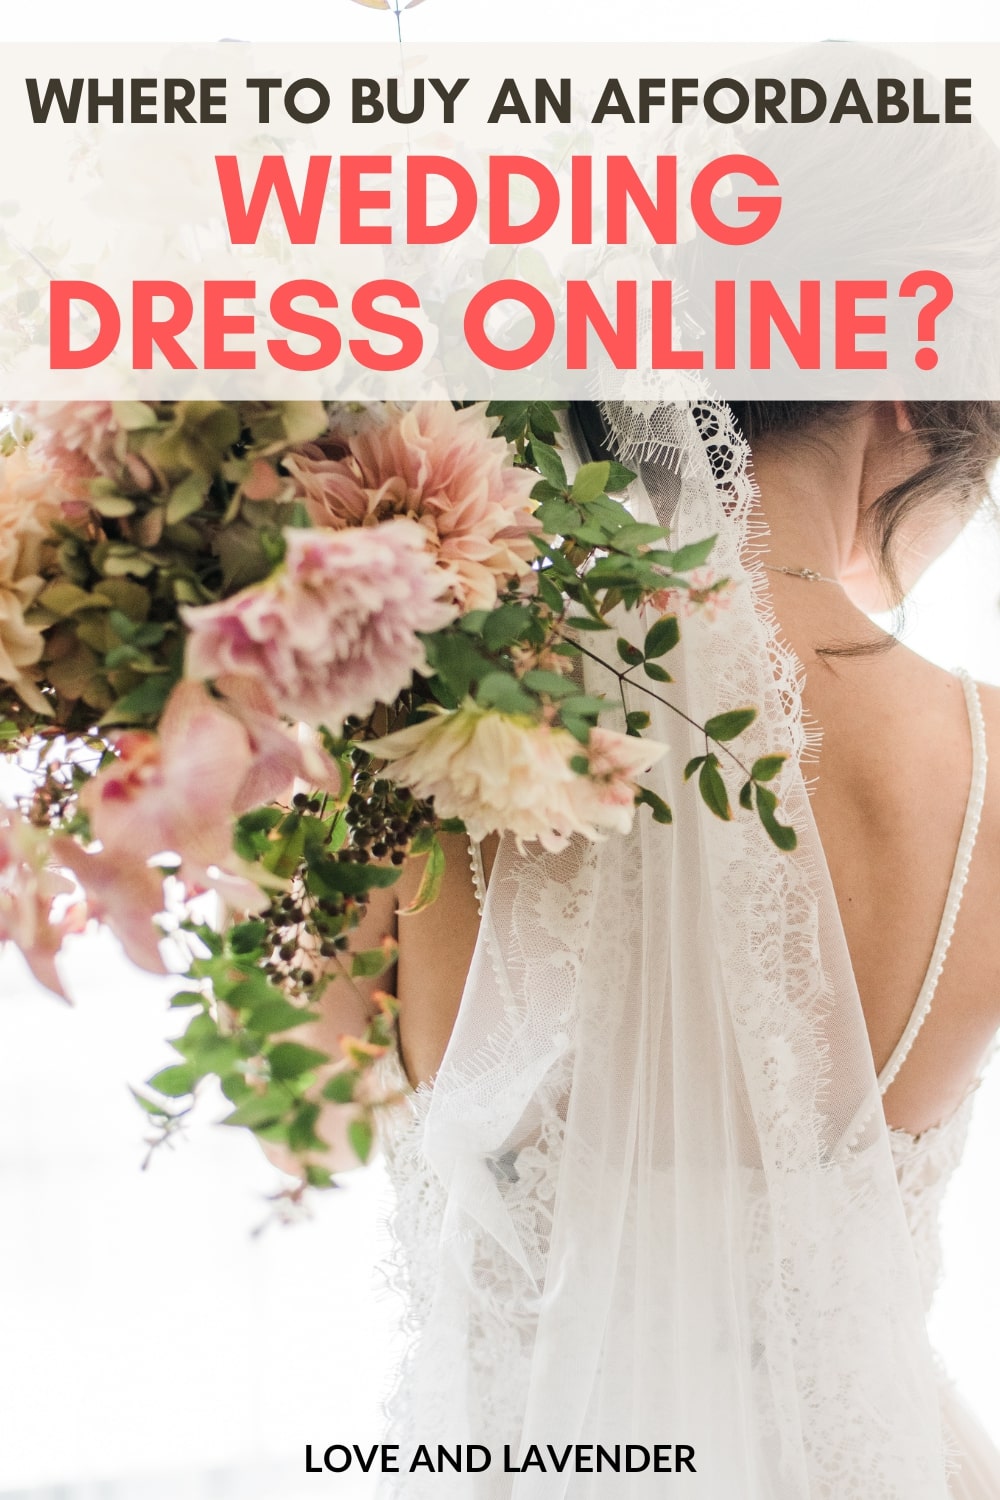 24 Best Online Shops To Buy Show-Stopping Affordable Wedding Dress [Updated 2022]